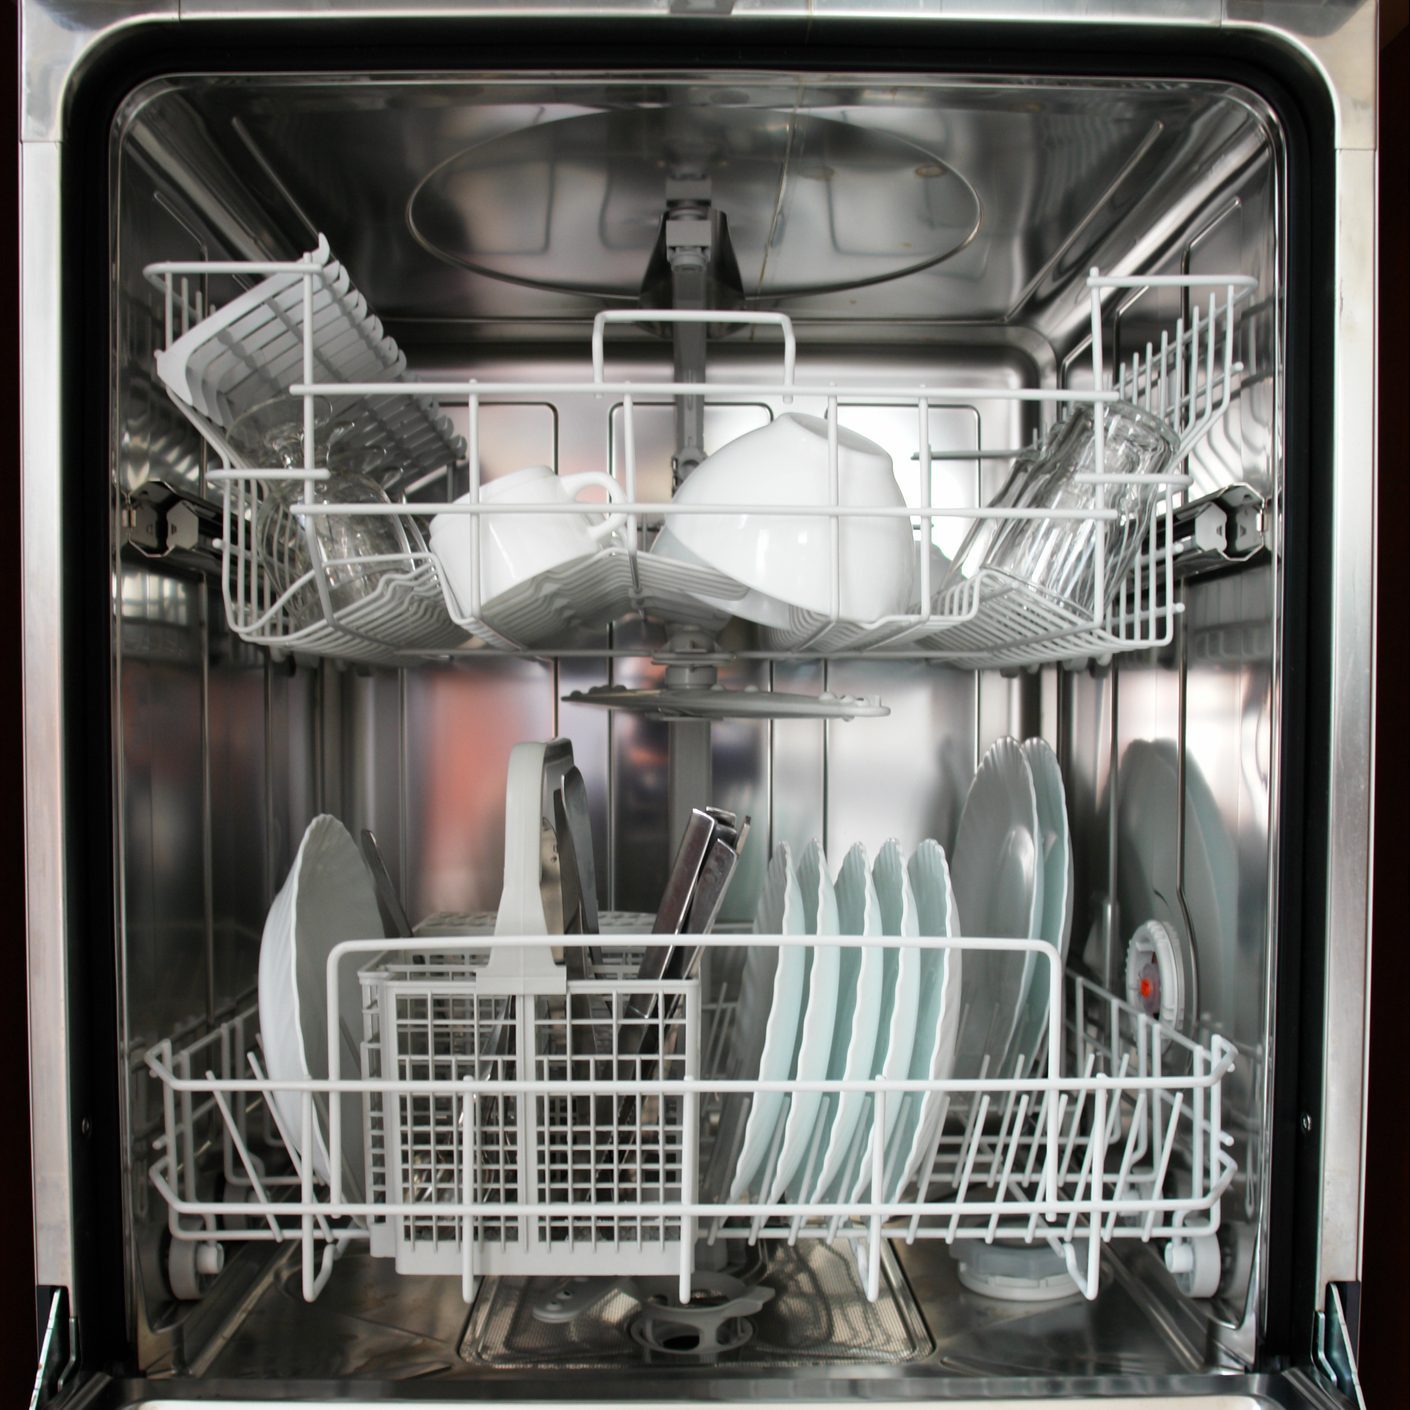 How To Fix a Dishwasher That Doesn't Dissolve the Soap